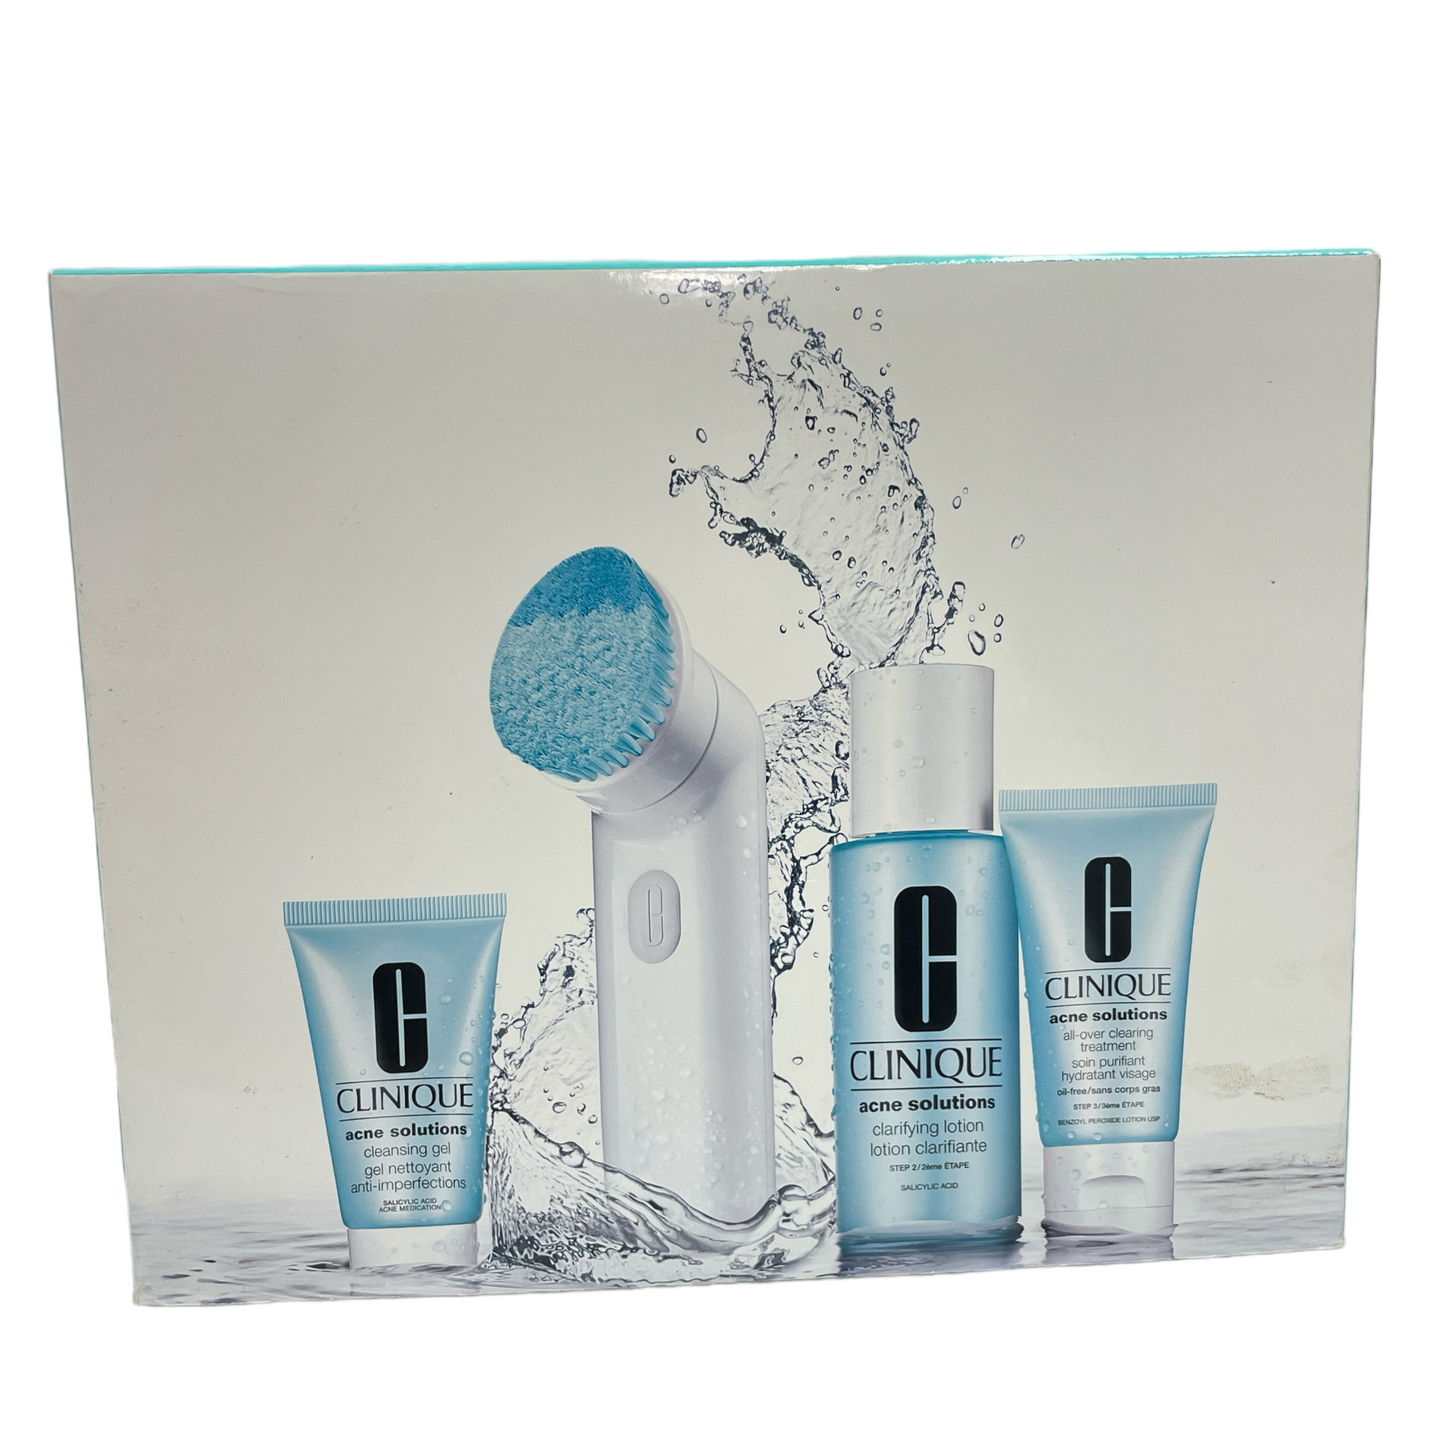 Clinique Clear Skin, Clear Skin Set Contains 4 Items